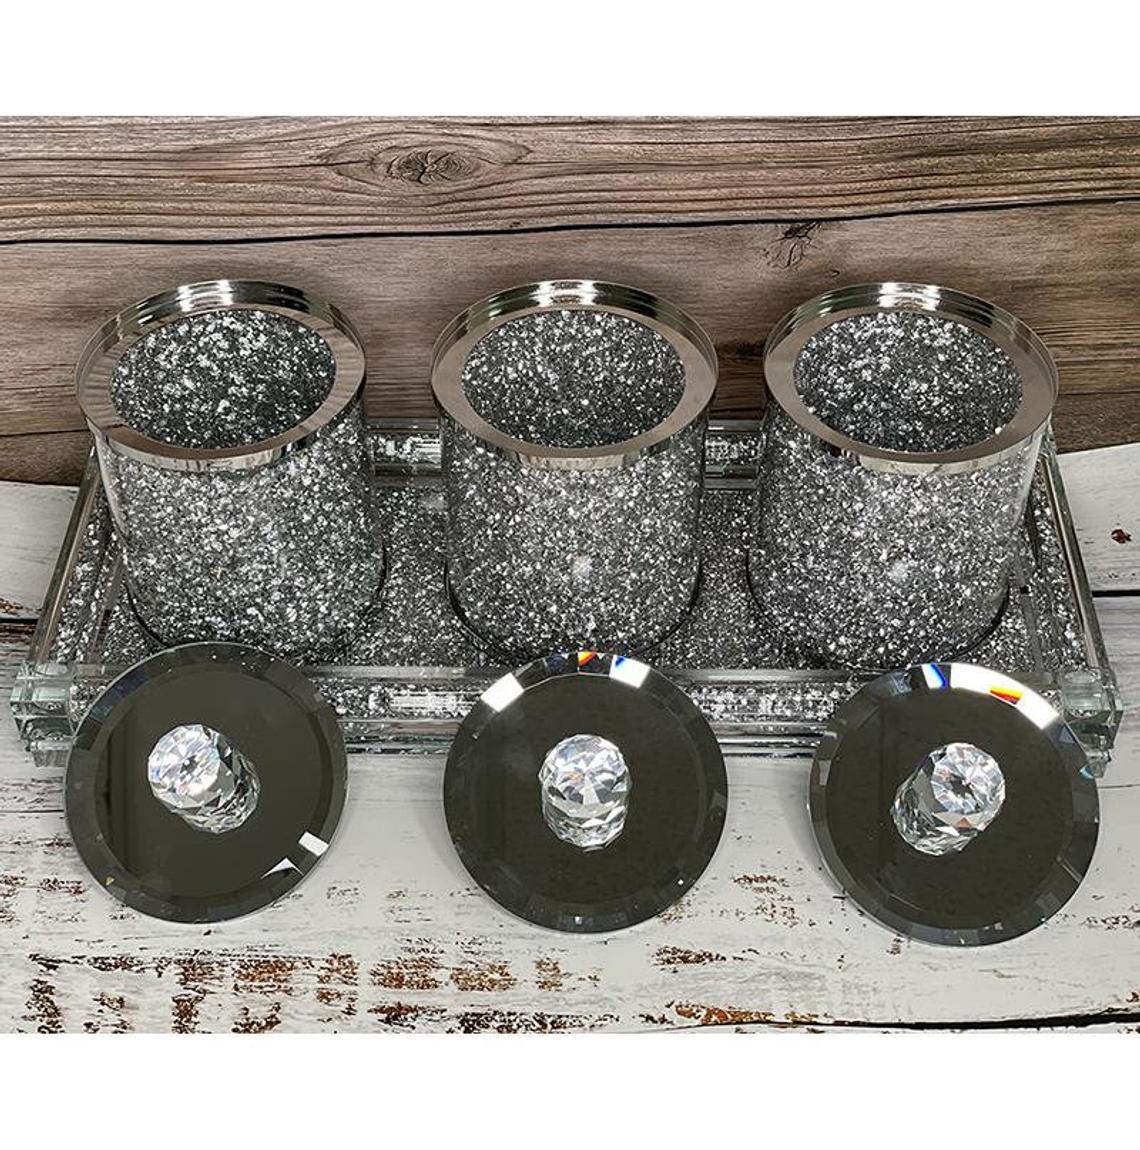 DIAMOND CRUSHED SILVER CRYSTAL FILLED TEA COFFEE SUGAR CANISTER JARS WITH TRAY✅ 